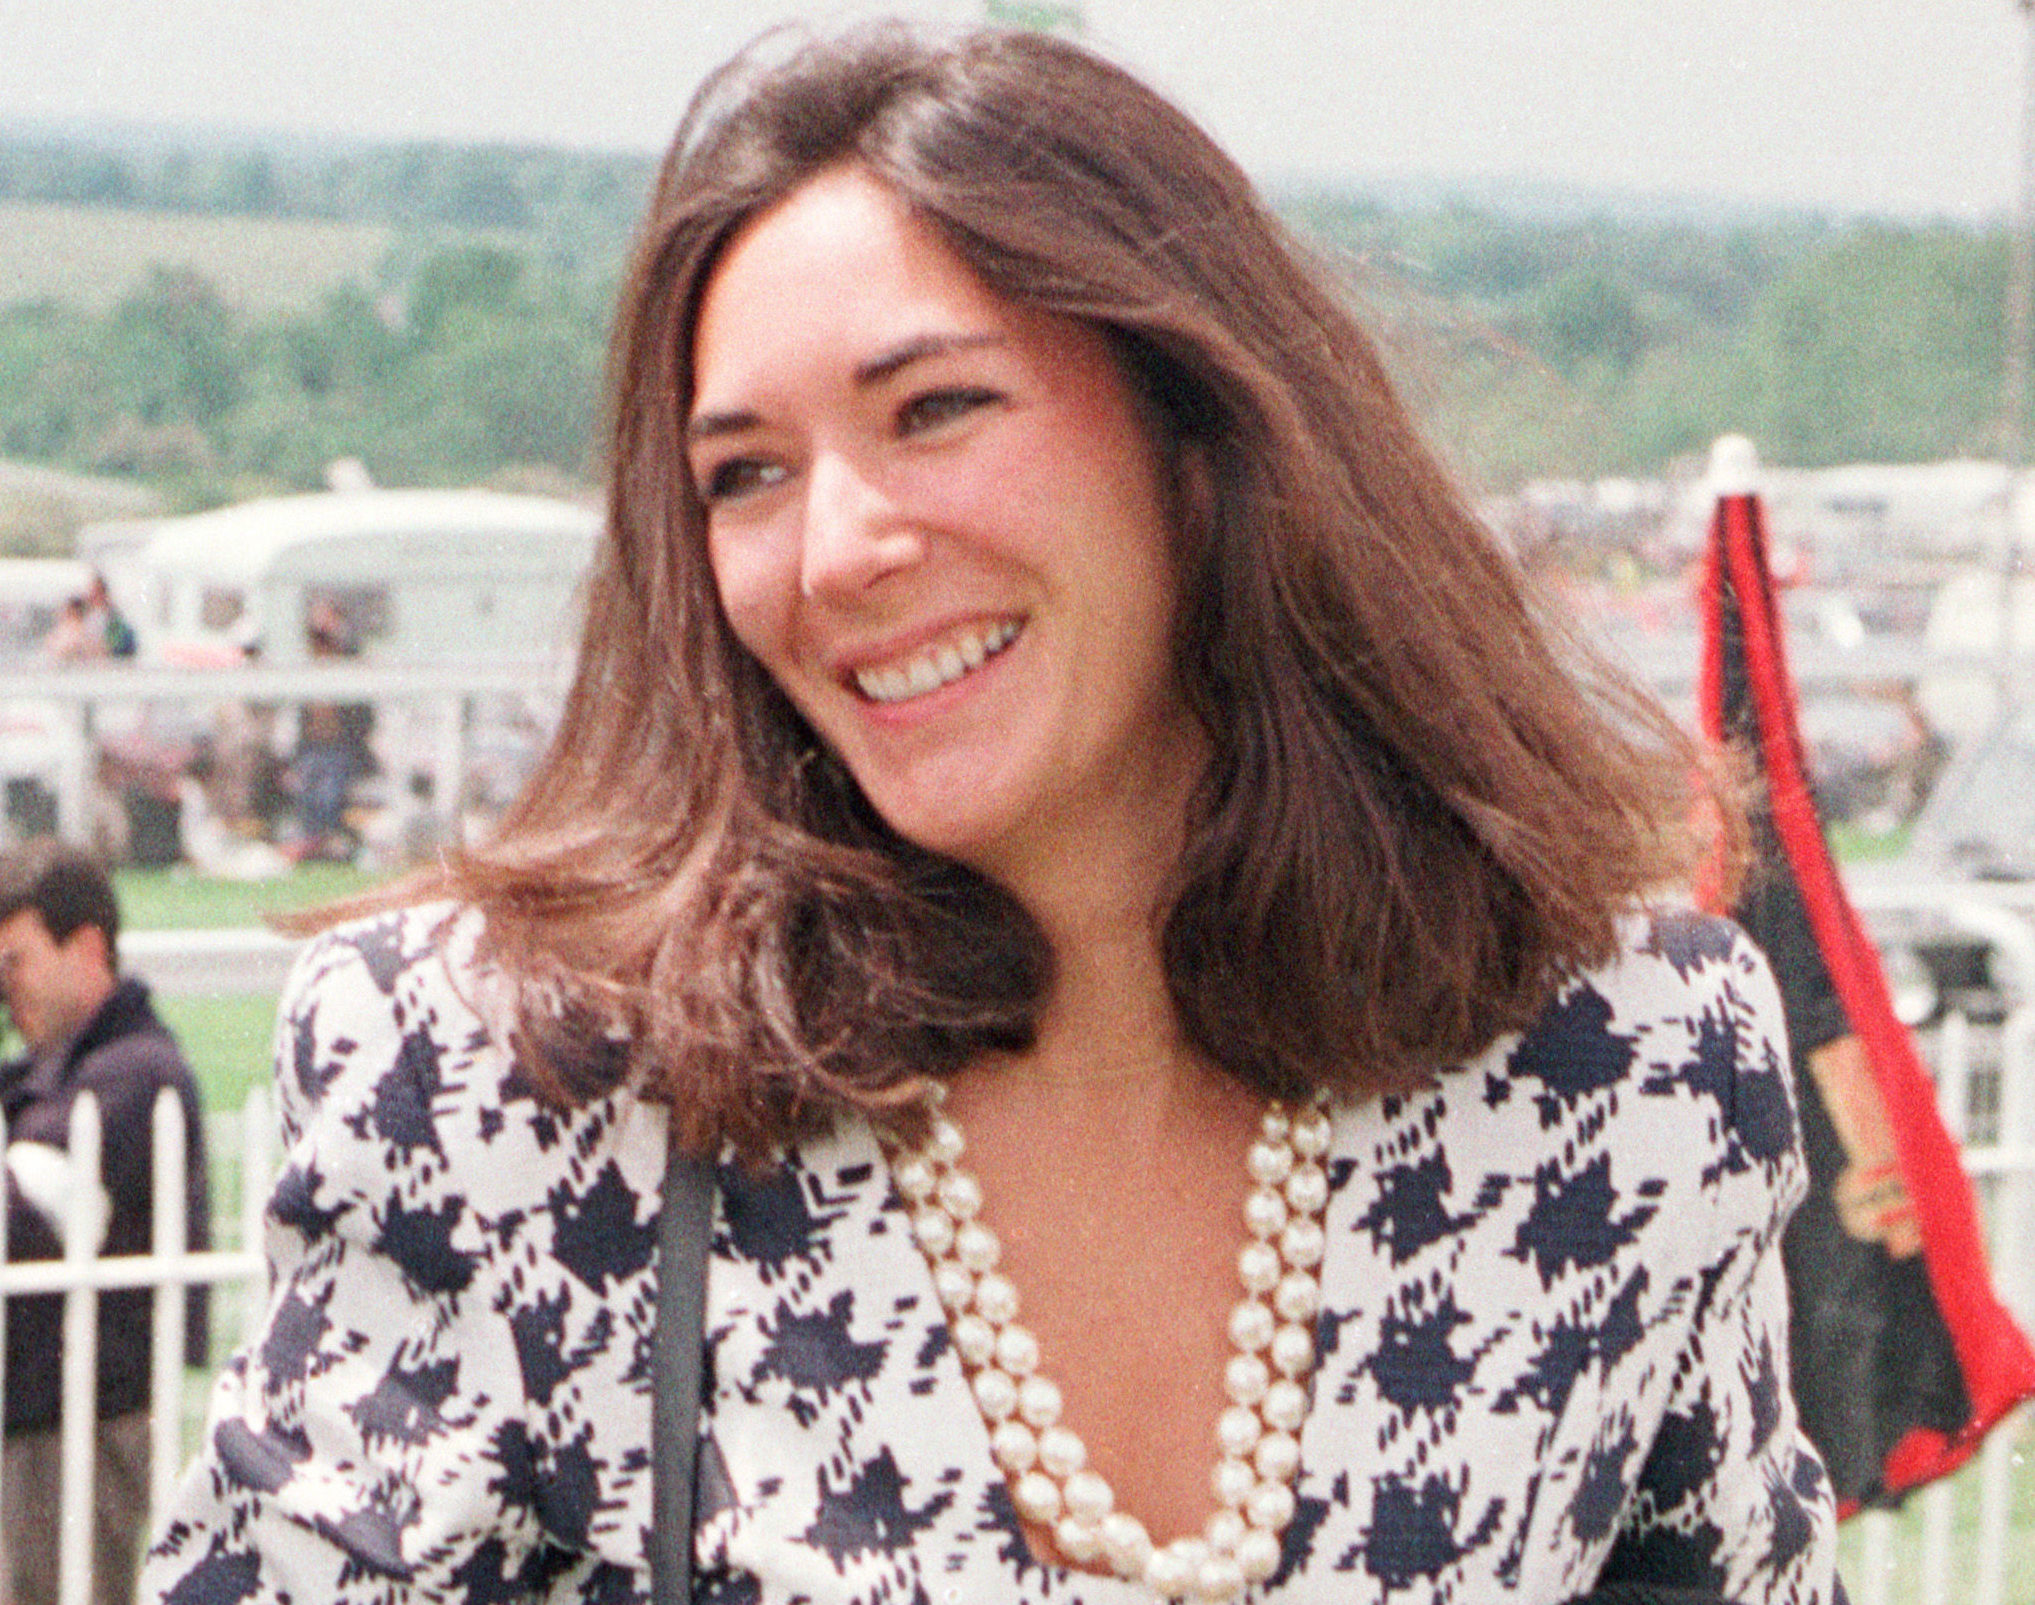 Ghislaine Maxwell pictured arriving at Epsom races in 1991